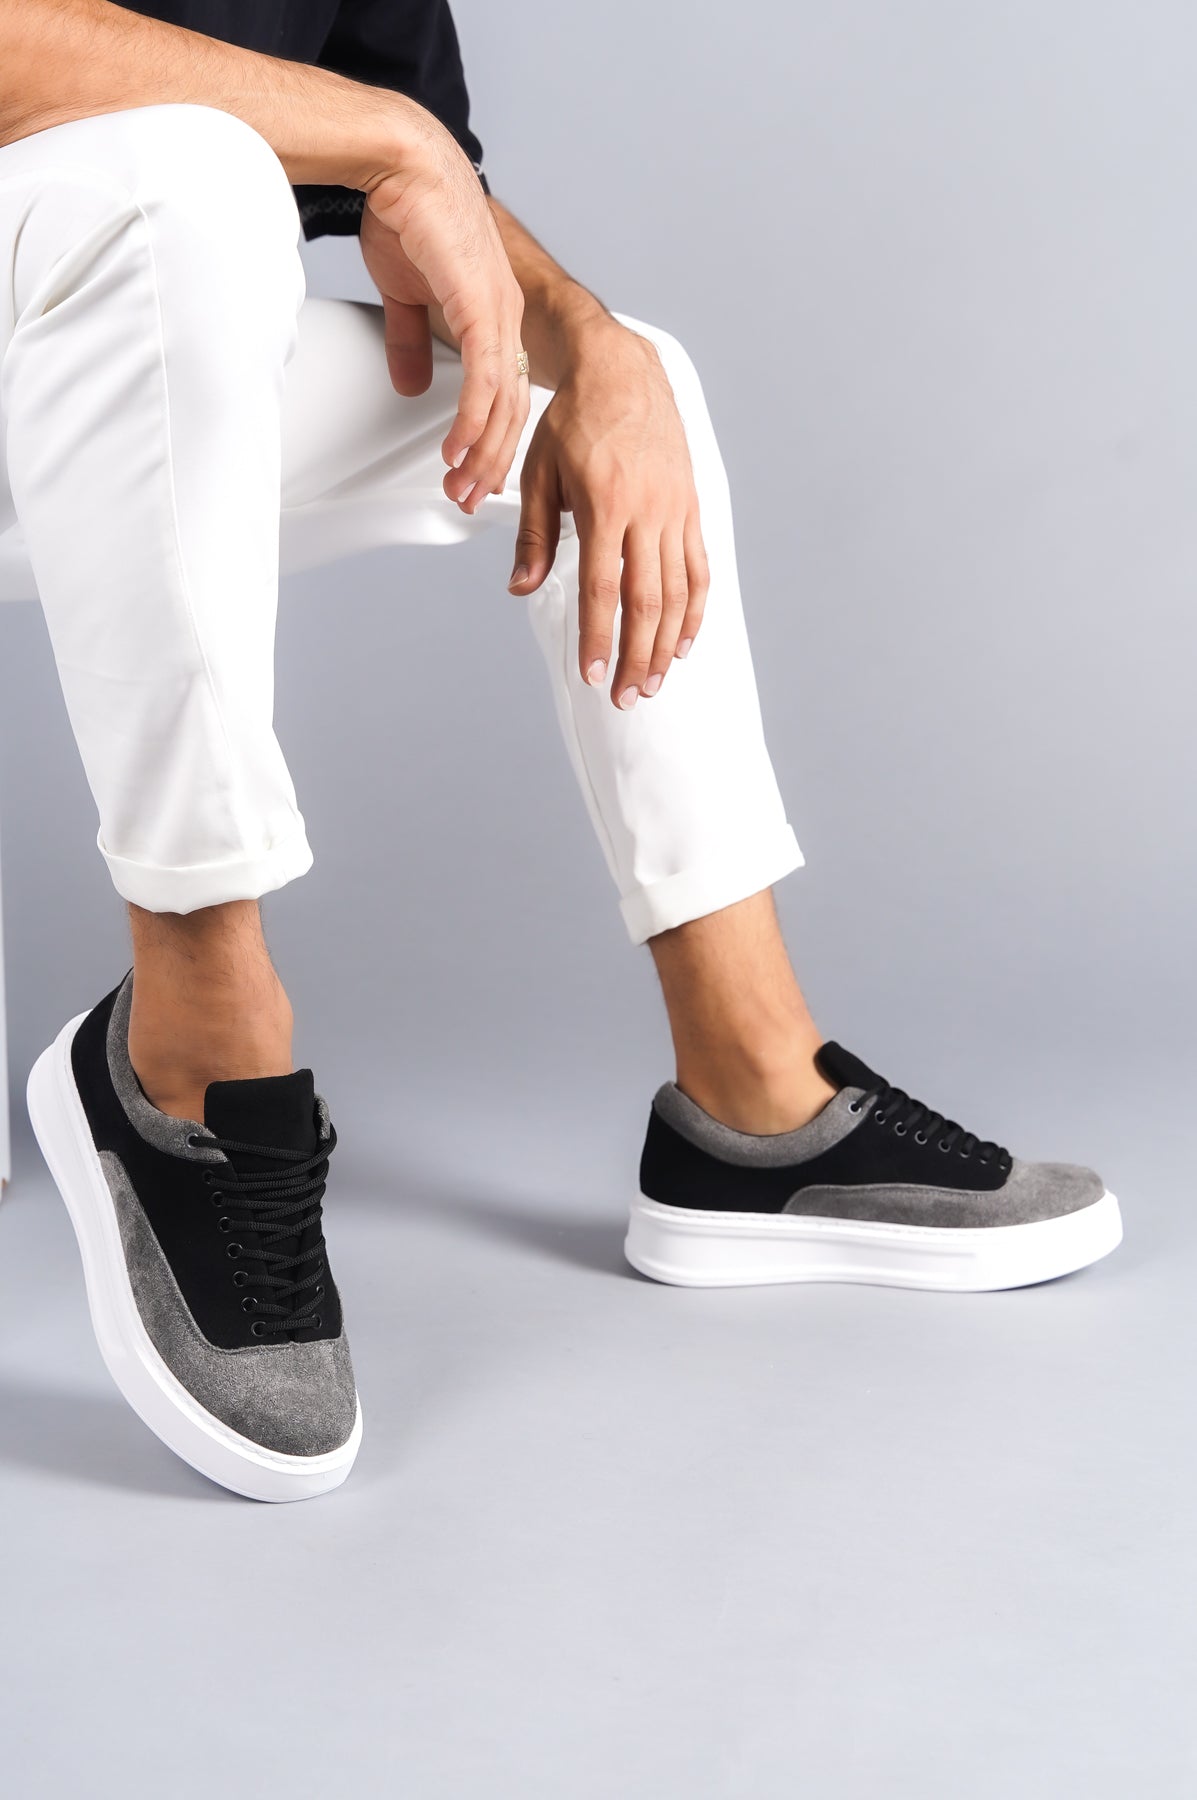 KB-005 Black Gray Suede Laced Casual Men's Sneakers Shoes - STREETMODE ™